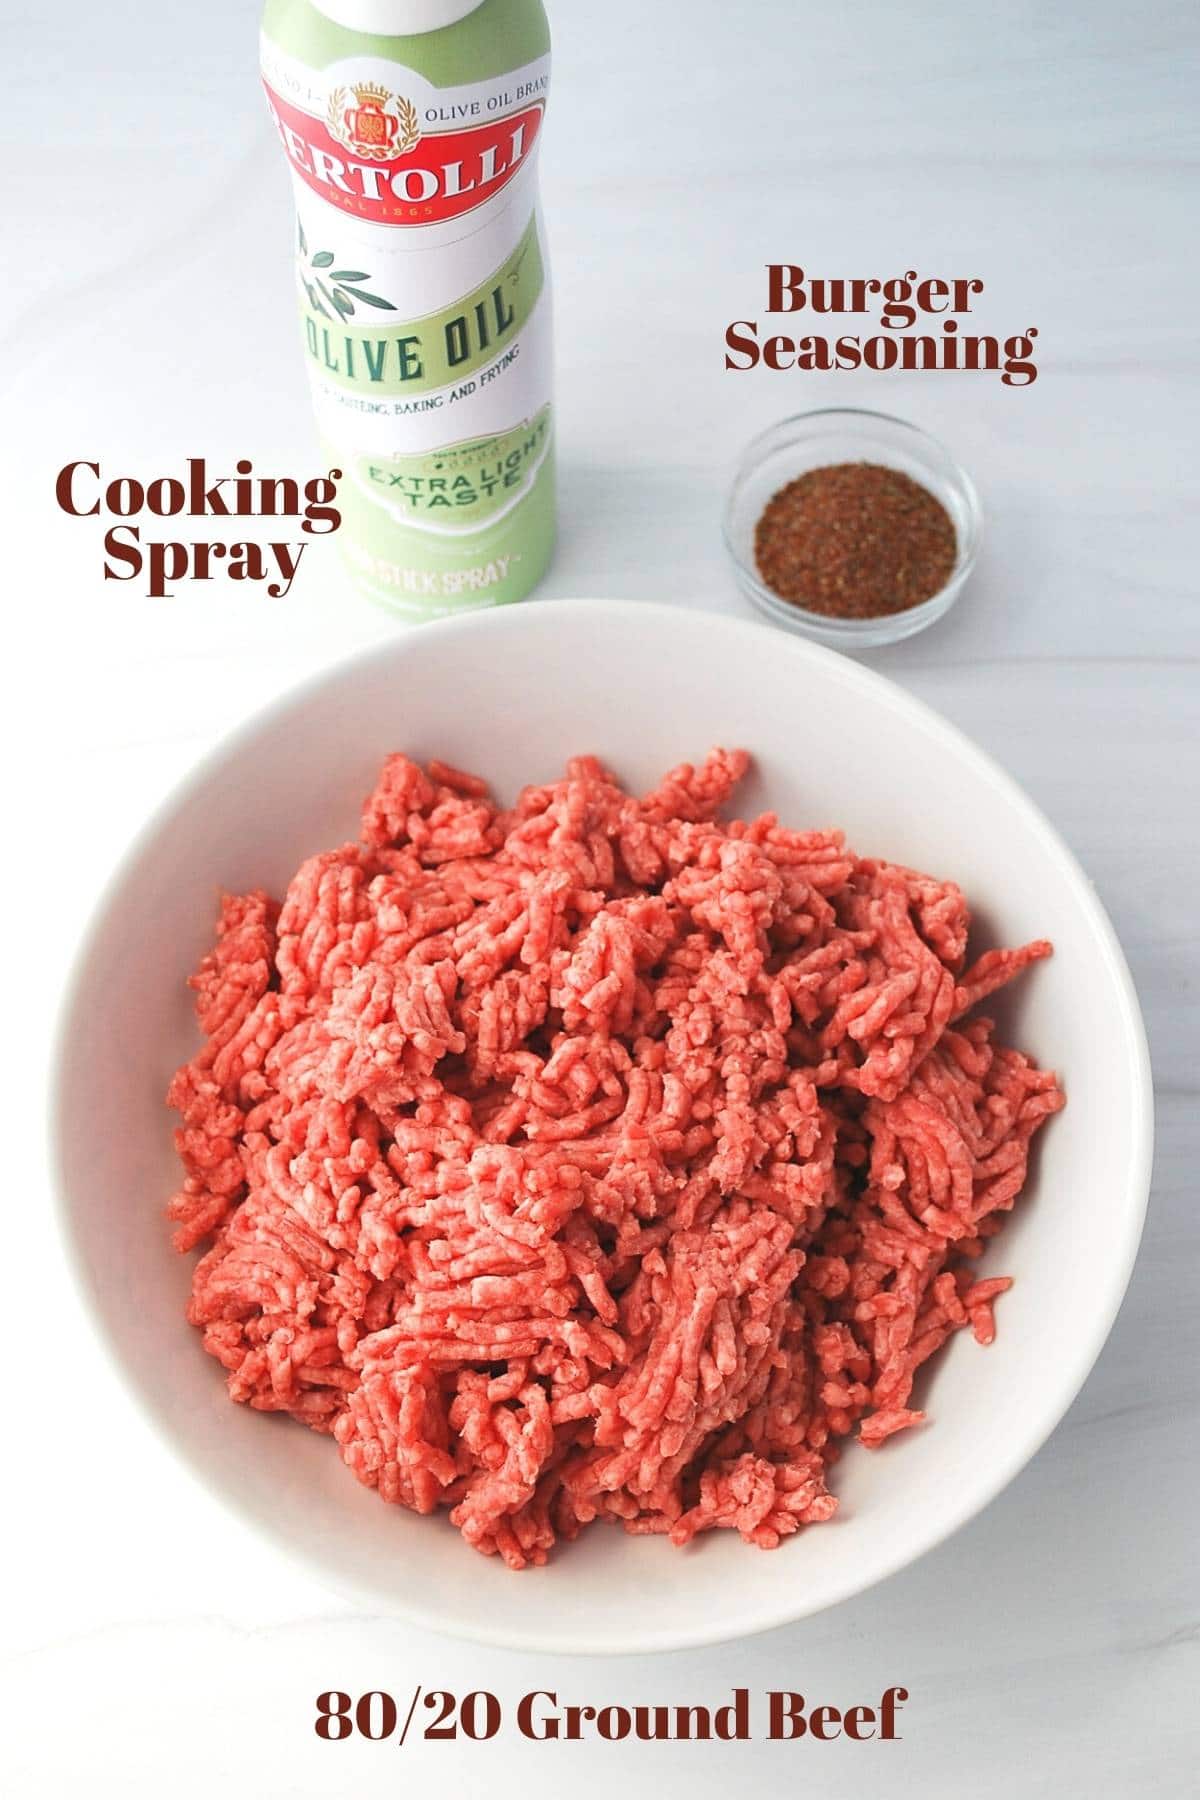 ground beef in a bowl with a dish of burger seasoning and cooking spray